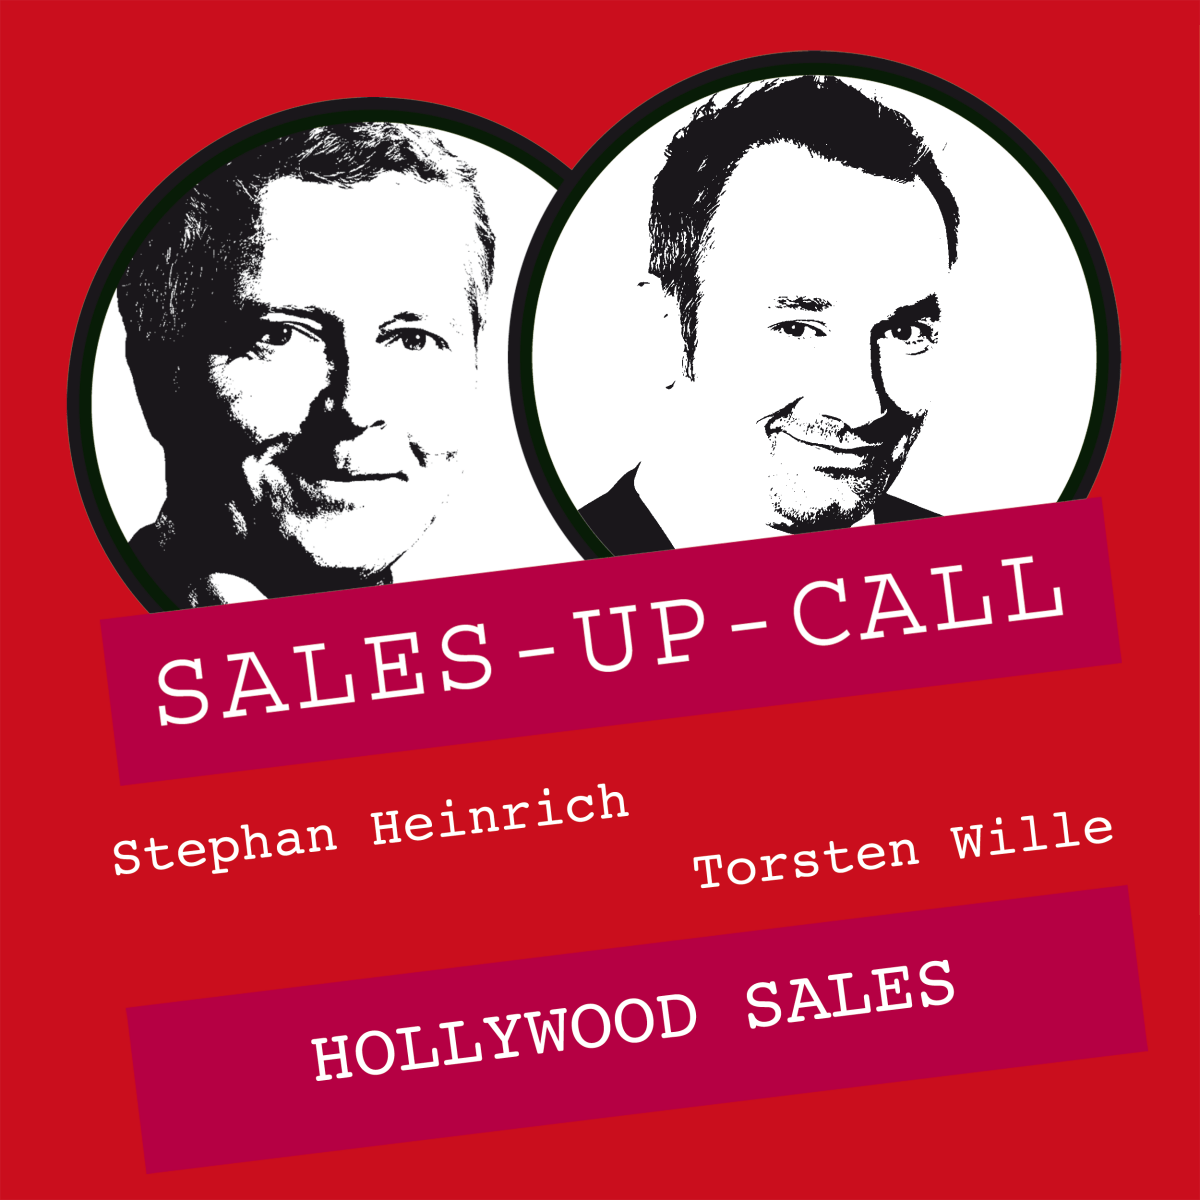 Hollywood Sales - Sales-up-Call - Stephan Heinrich